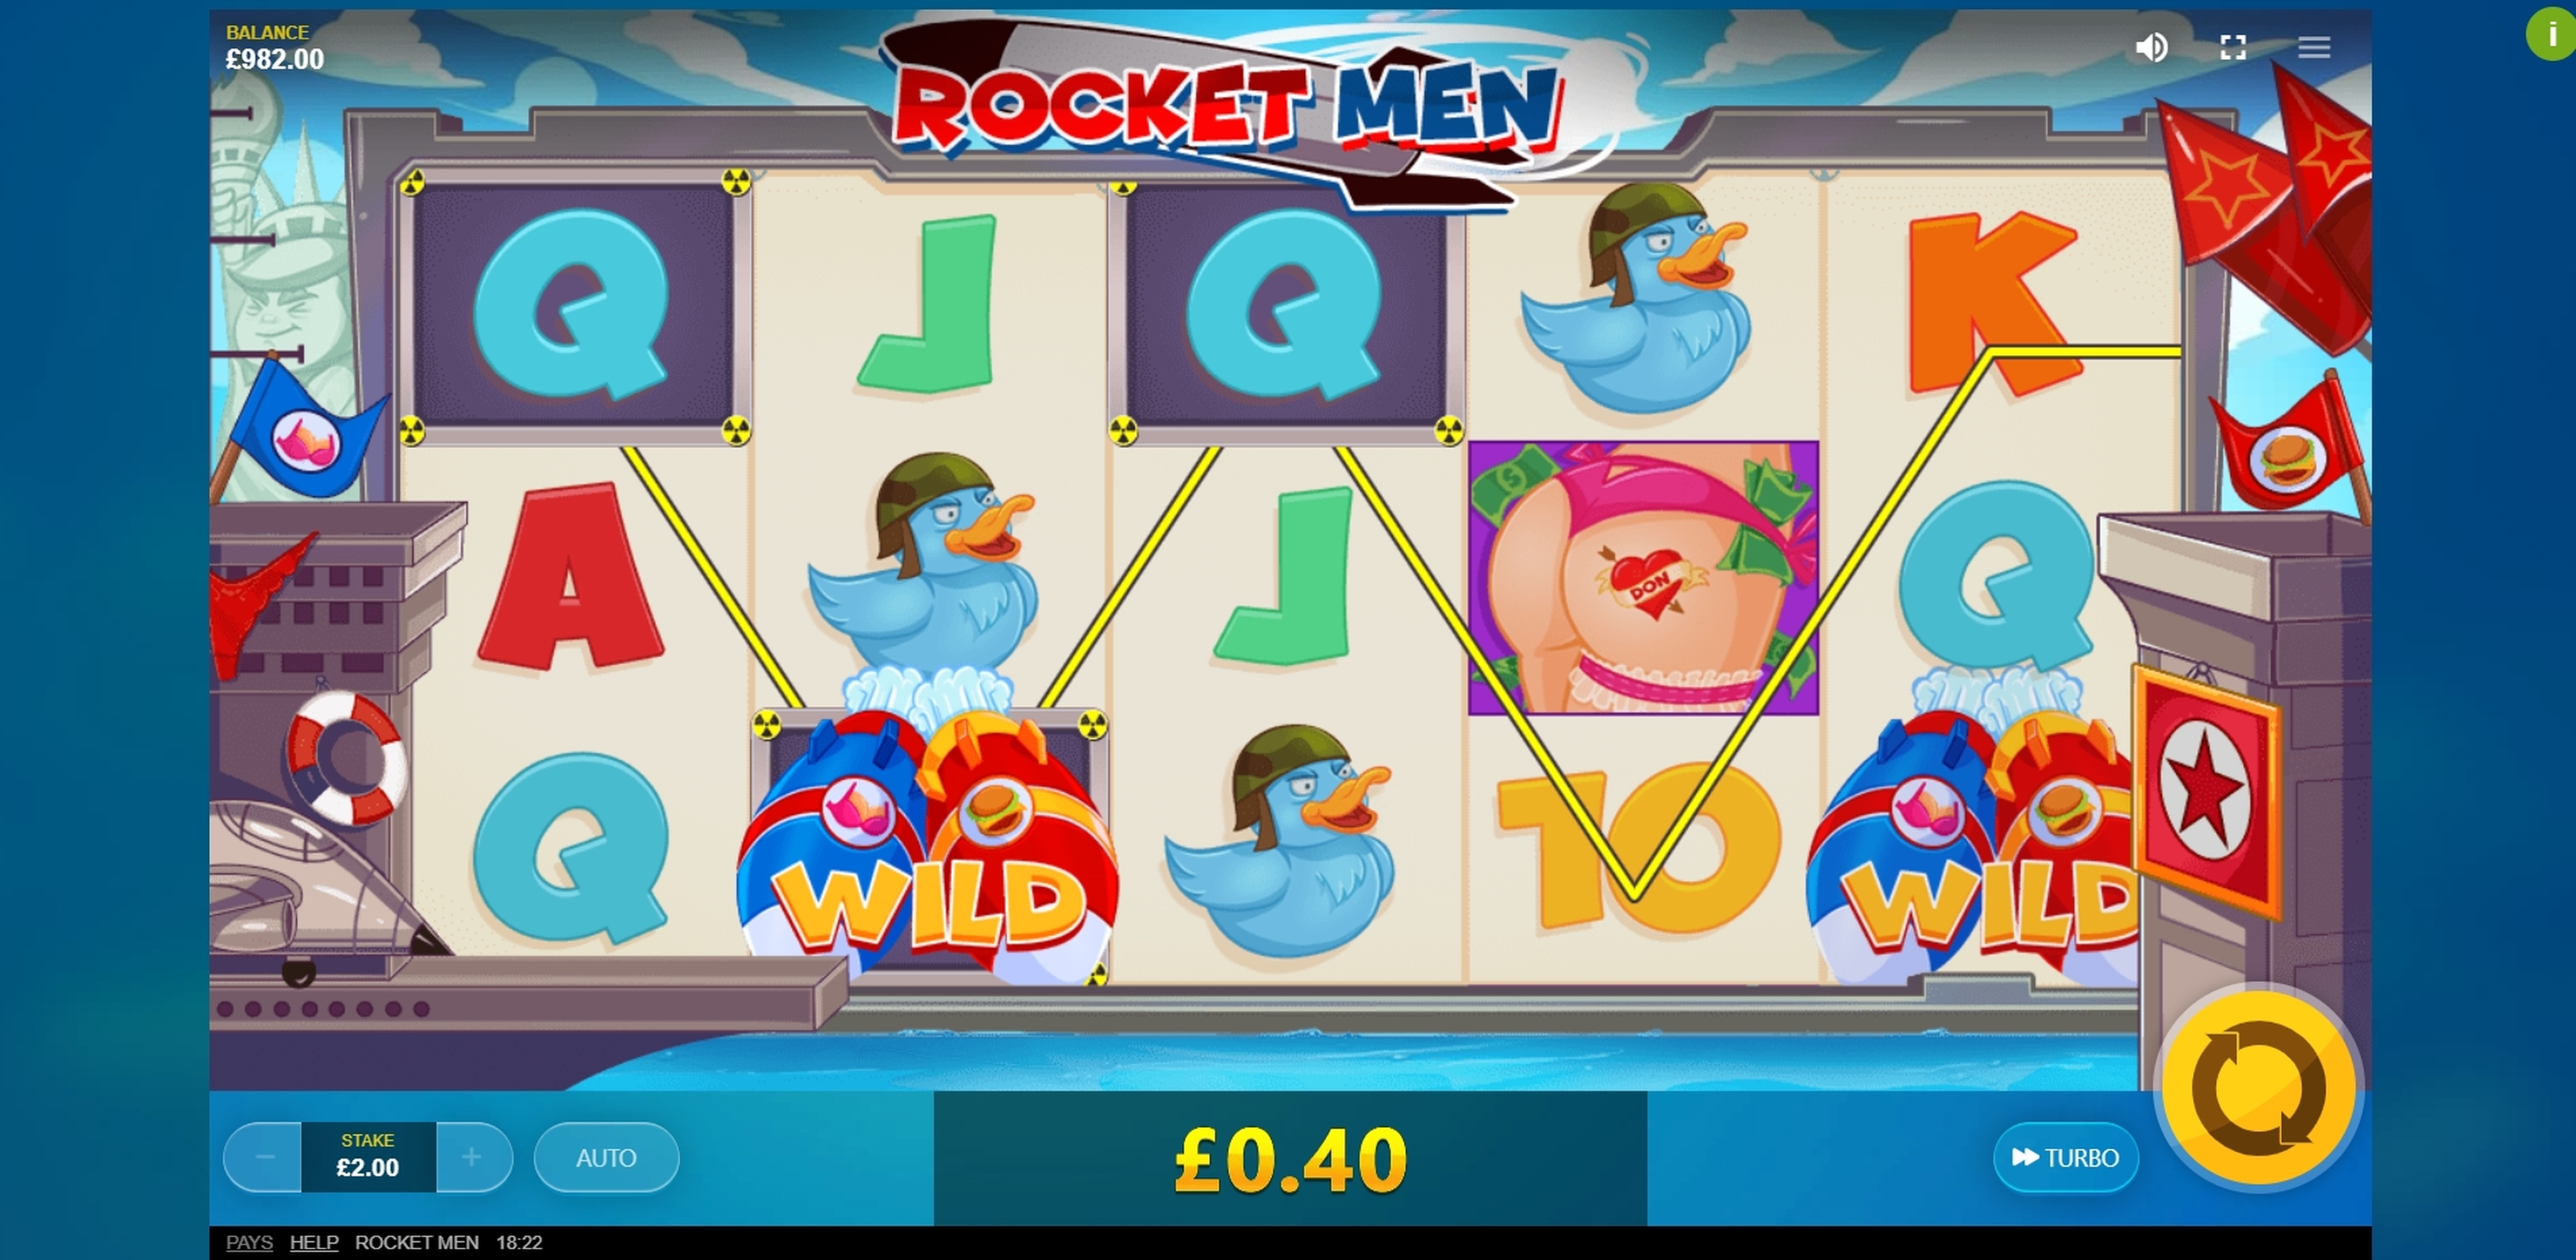 Win Money in Rocket Man Free Slot Game by Red Tiger Gaming